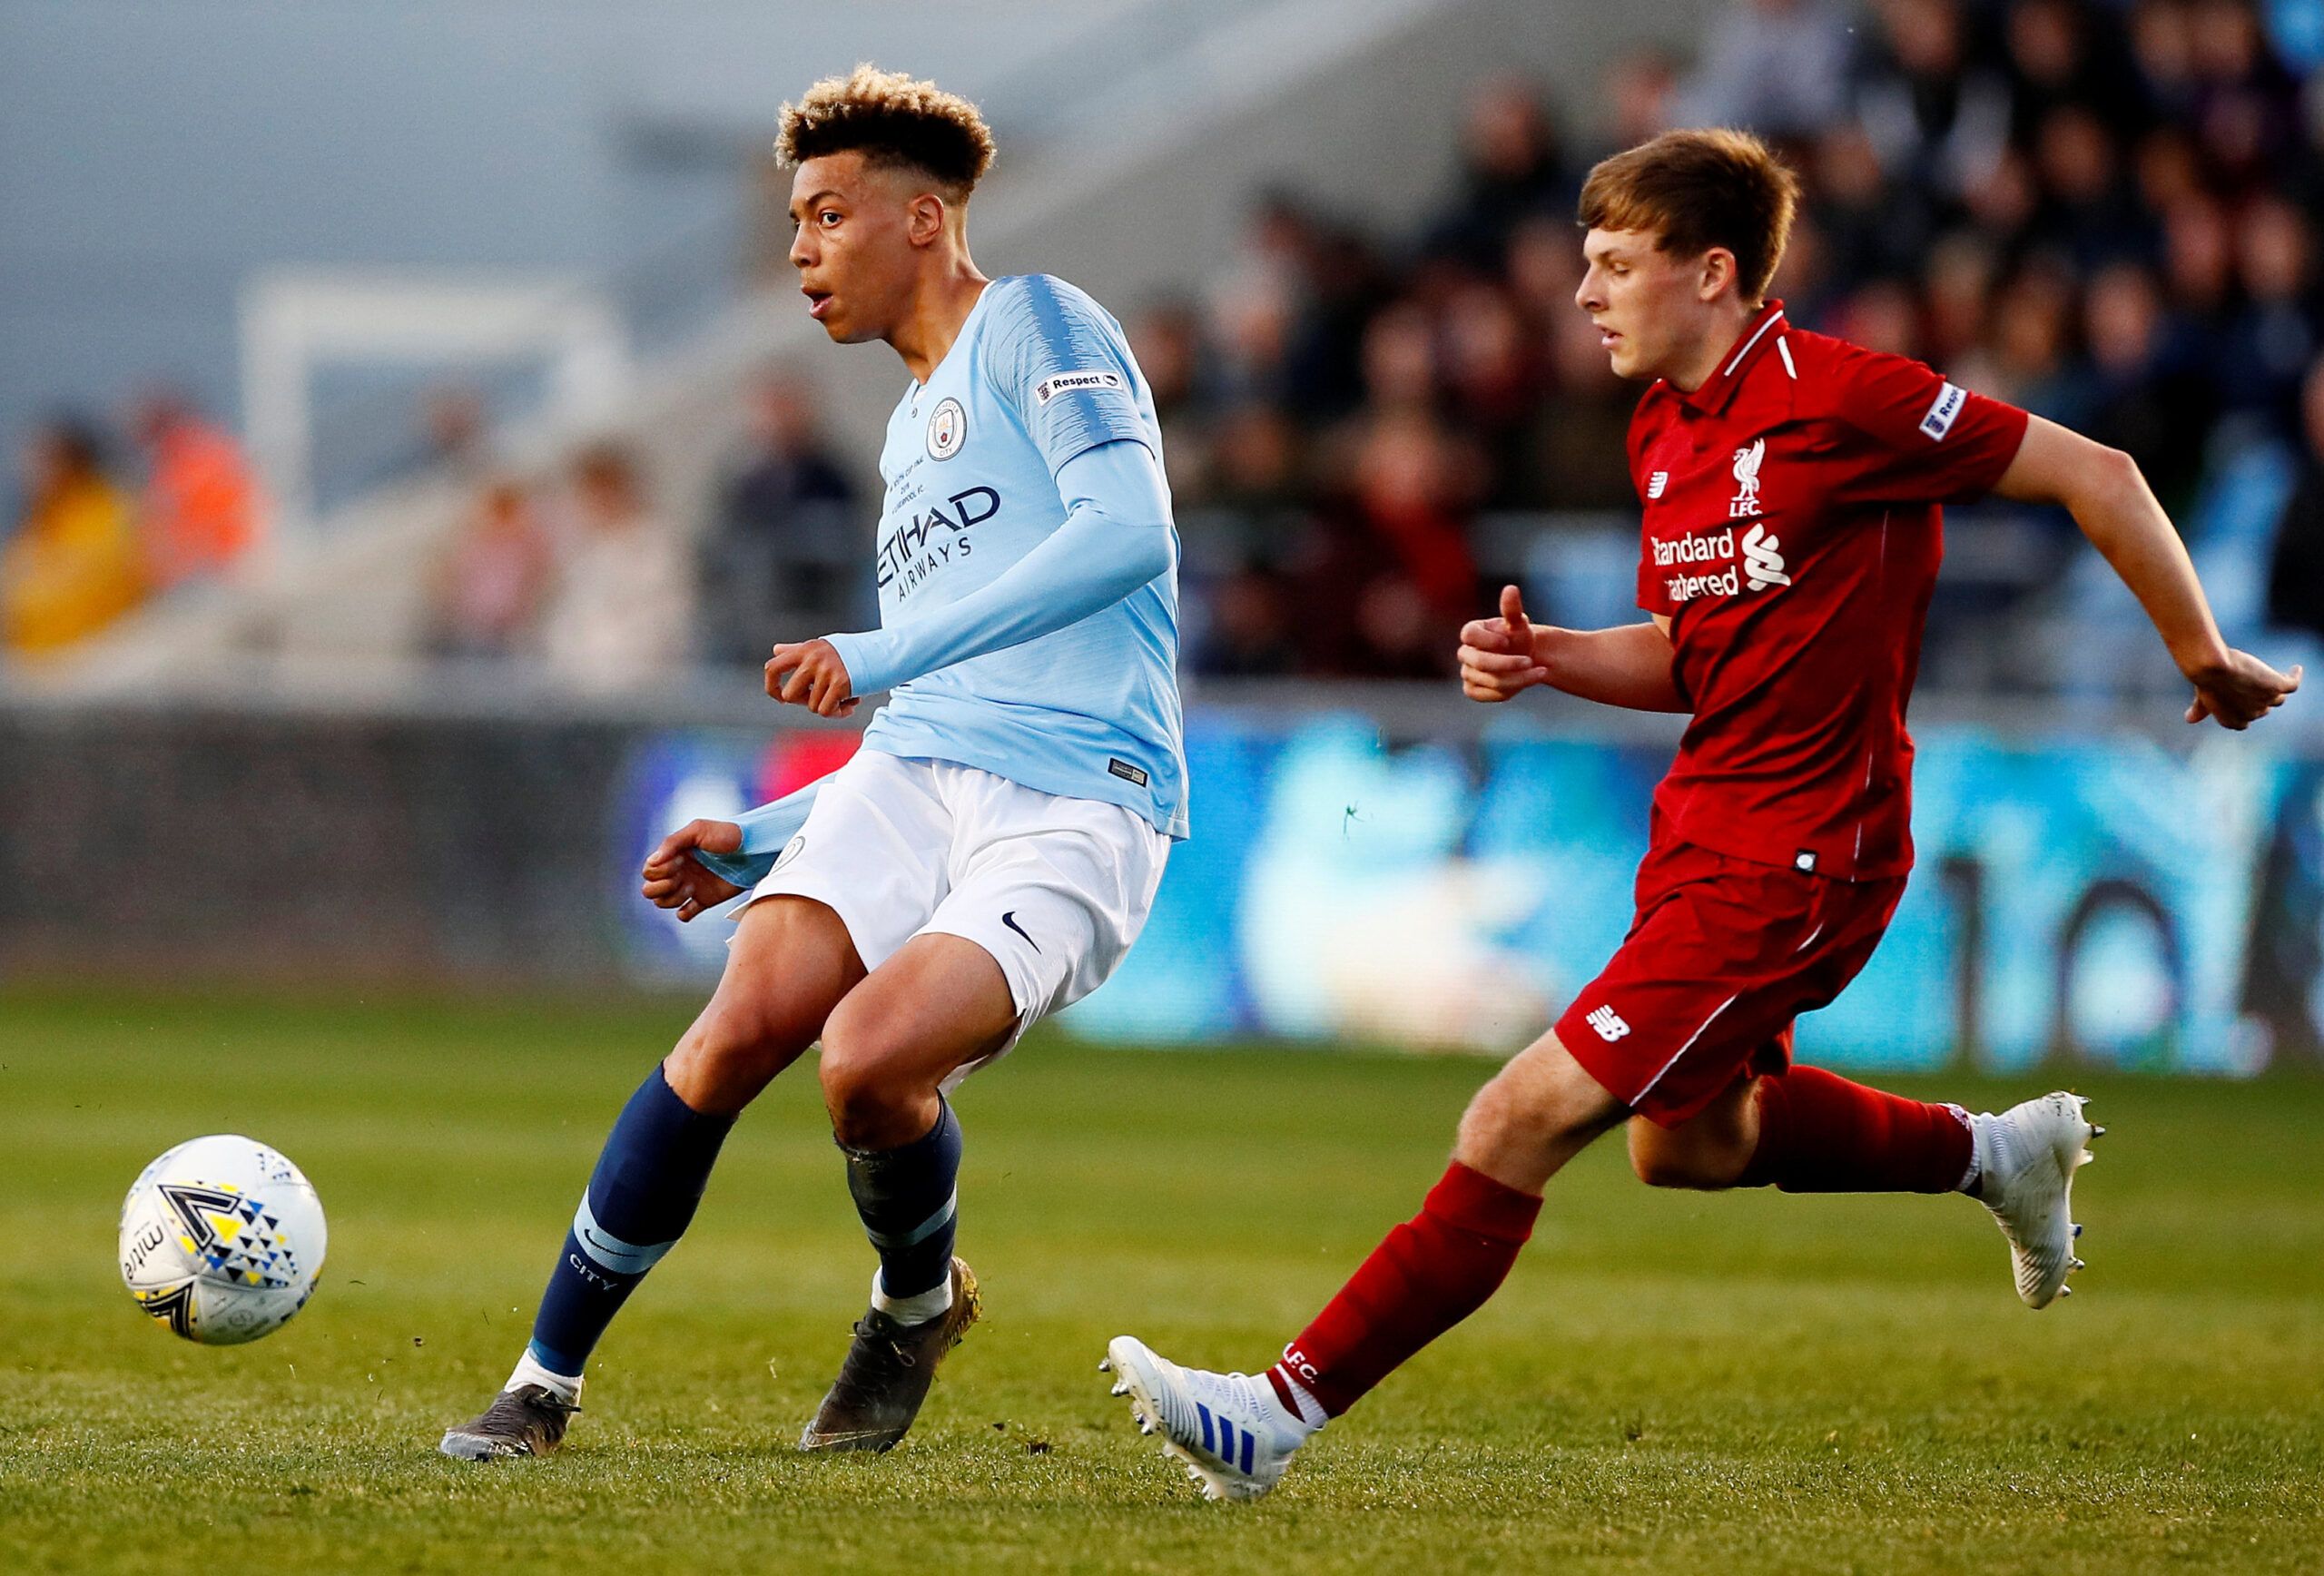 Soccer Football - FA Youth Cup Final - Manchester City v Liverpool - The Academy Stadium, Manchester, Britain - April 25, 2019   Manchester City's Felix Nmecha in action with Liverpool's Leighton Clarkson   Action Images via Reuters/Jason Cairnduff